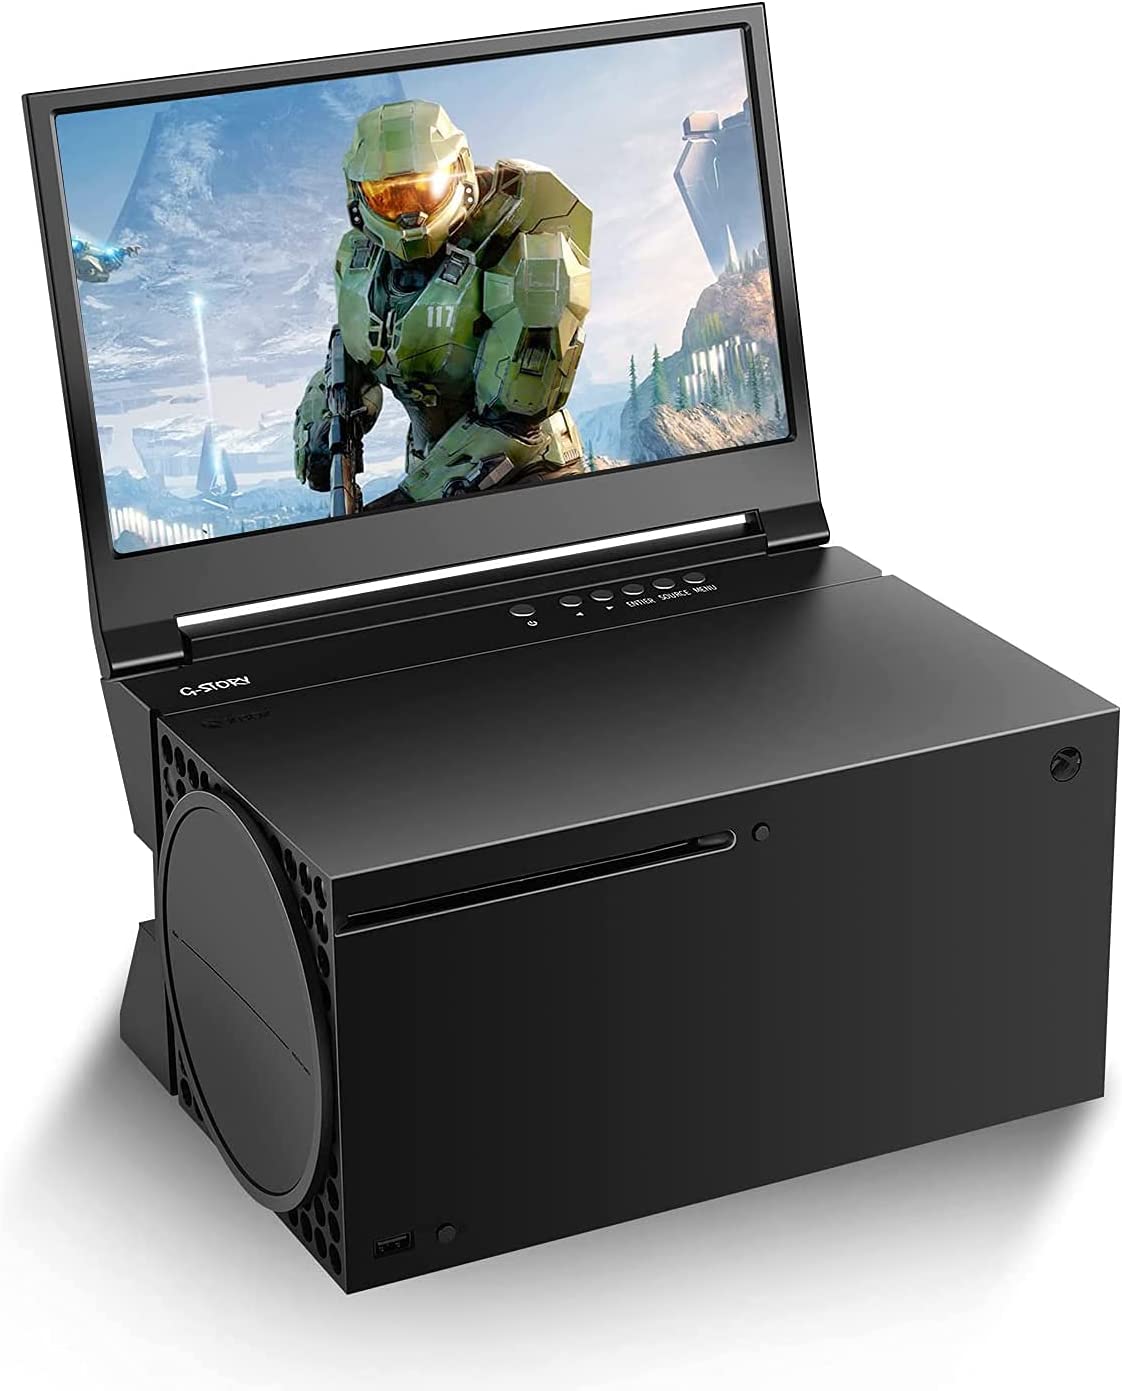  G-STORY 14'' Portable Monitor for Xbox Series X 4K